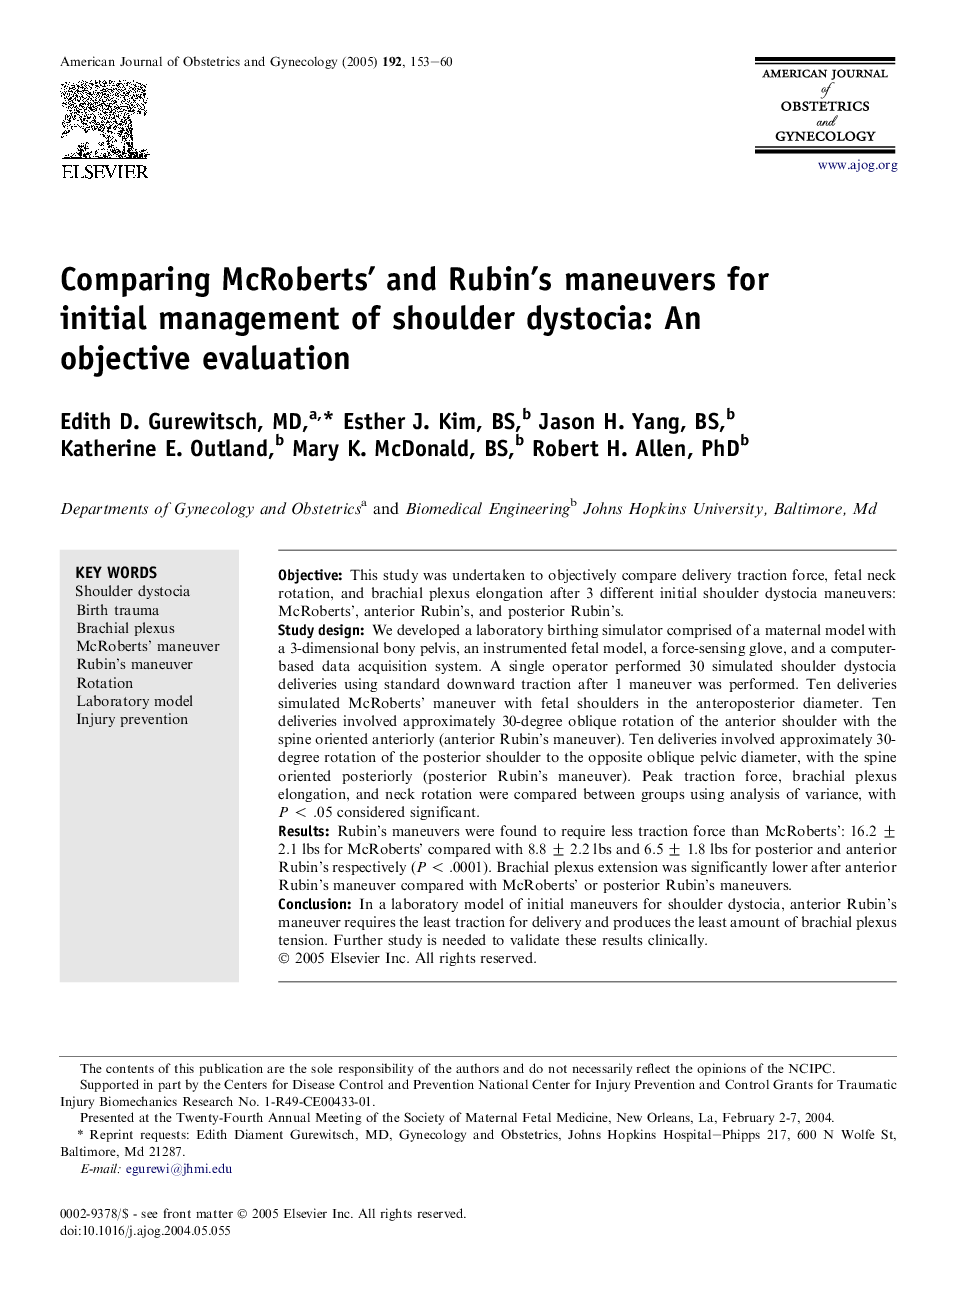 Comparing McRoberts' and Rubin's maneuvers for initial management of shoulder dystocia: An objective evaluation